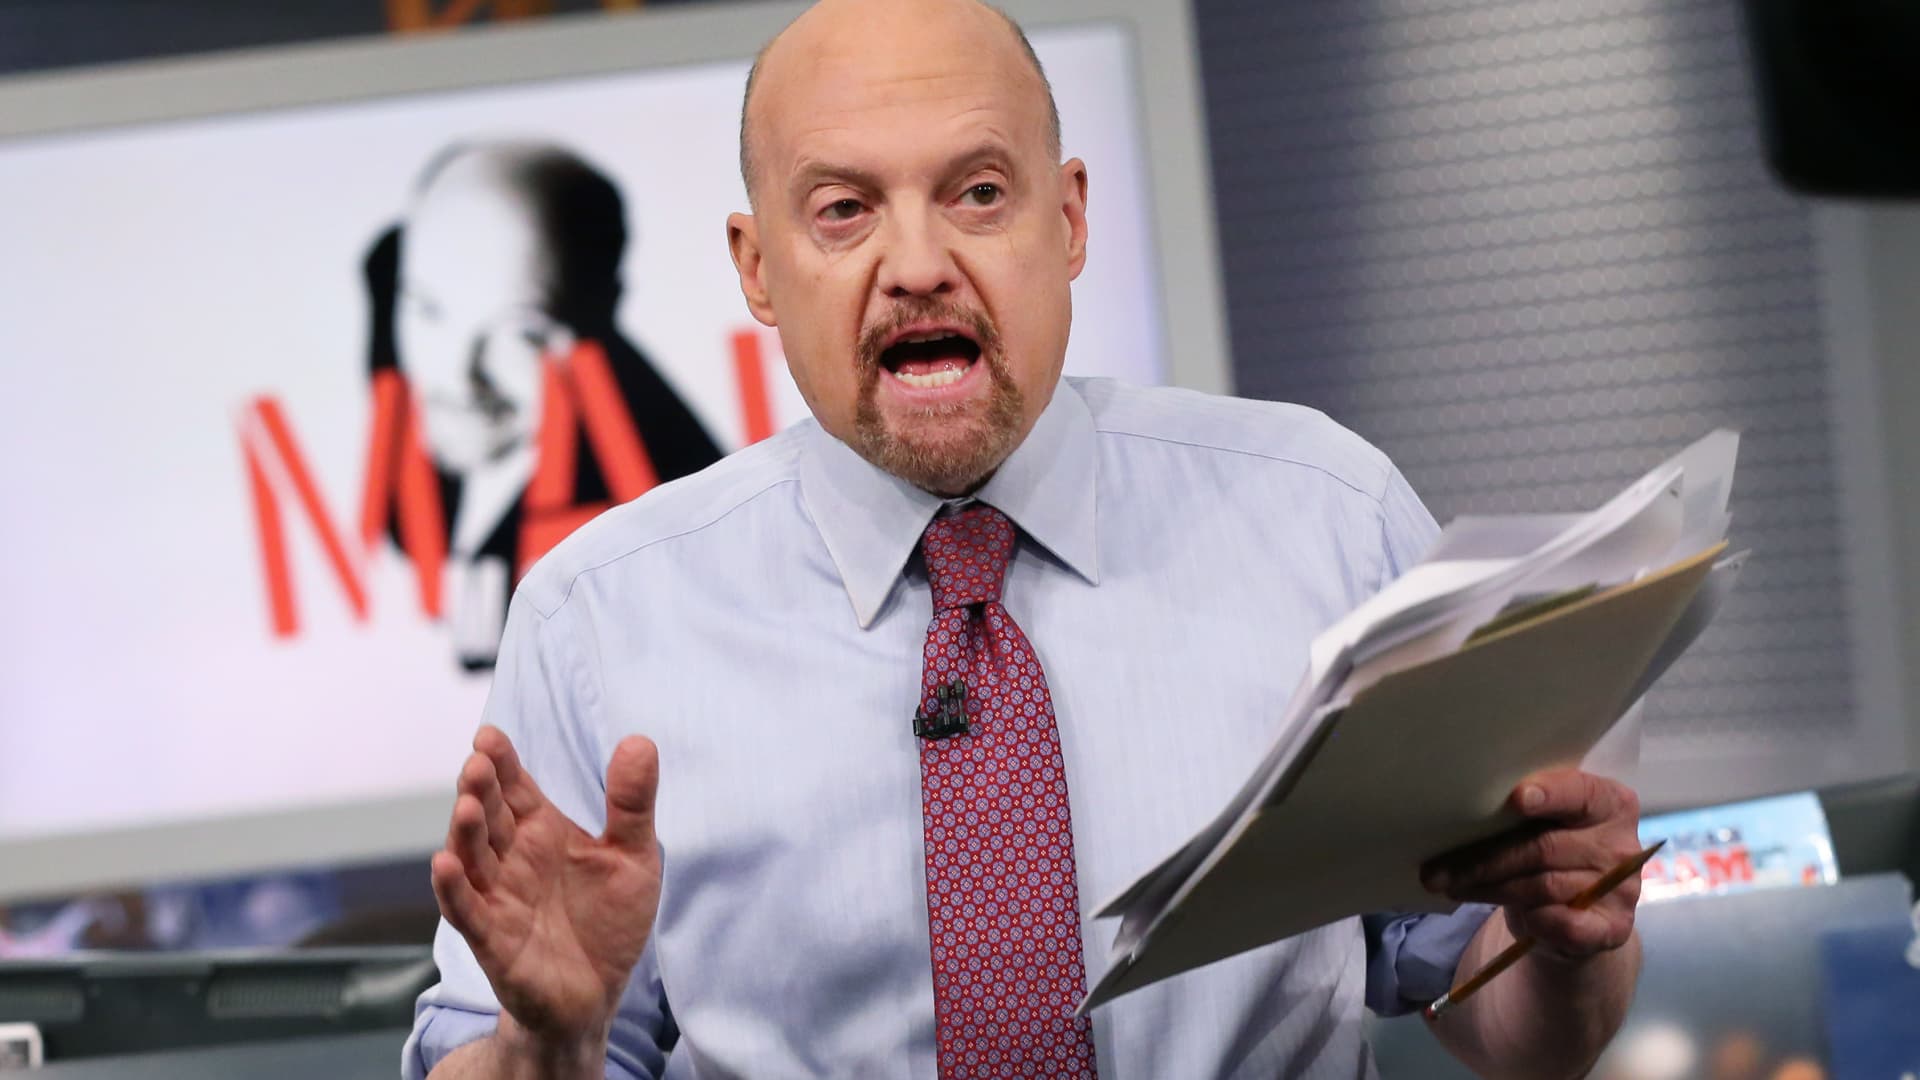 Jim Cramer says to stay away from this post-SPAC stock